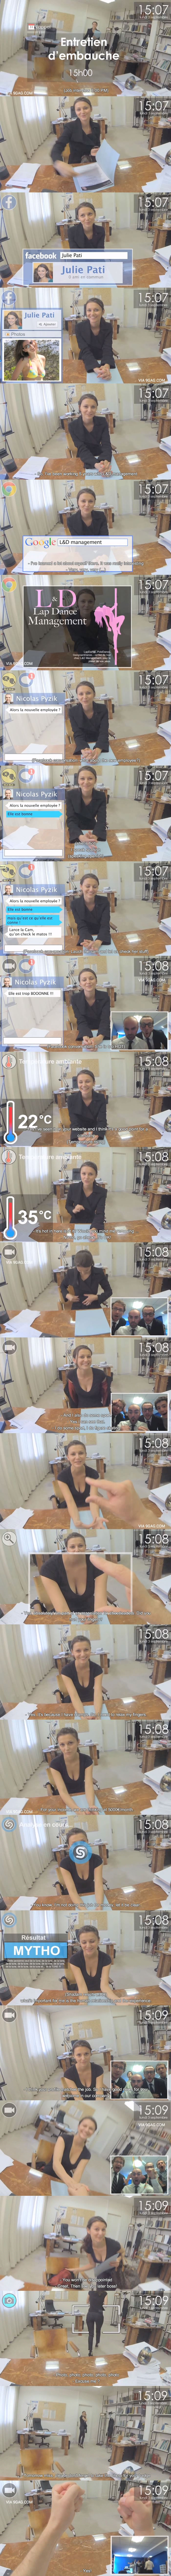 what men would really do with google glass during an interview, lol, hot girl